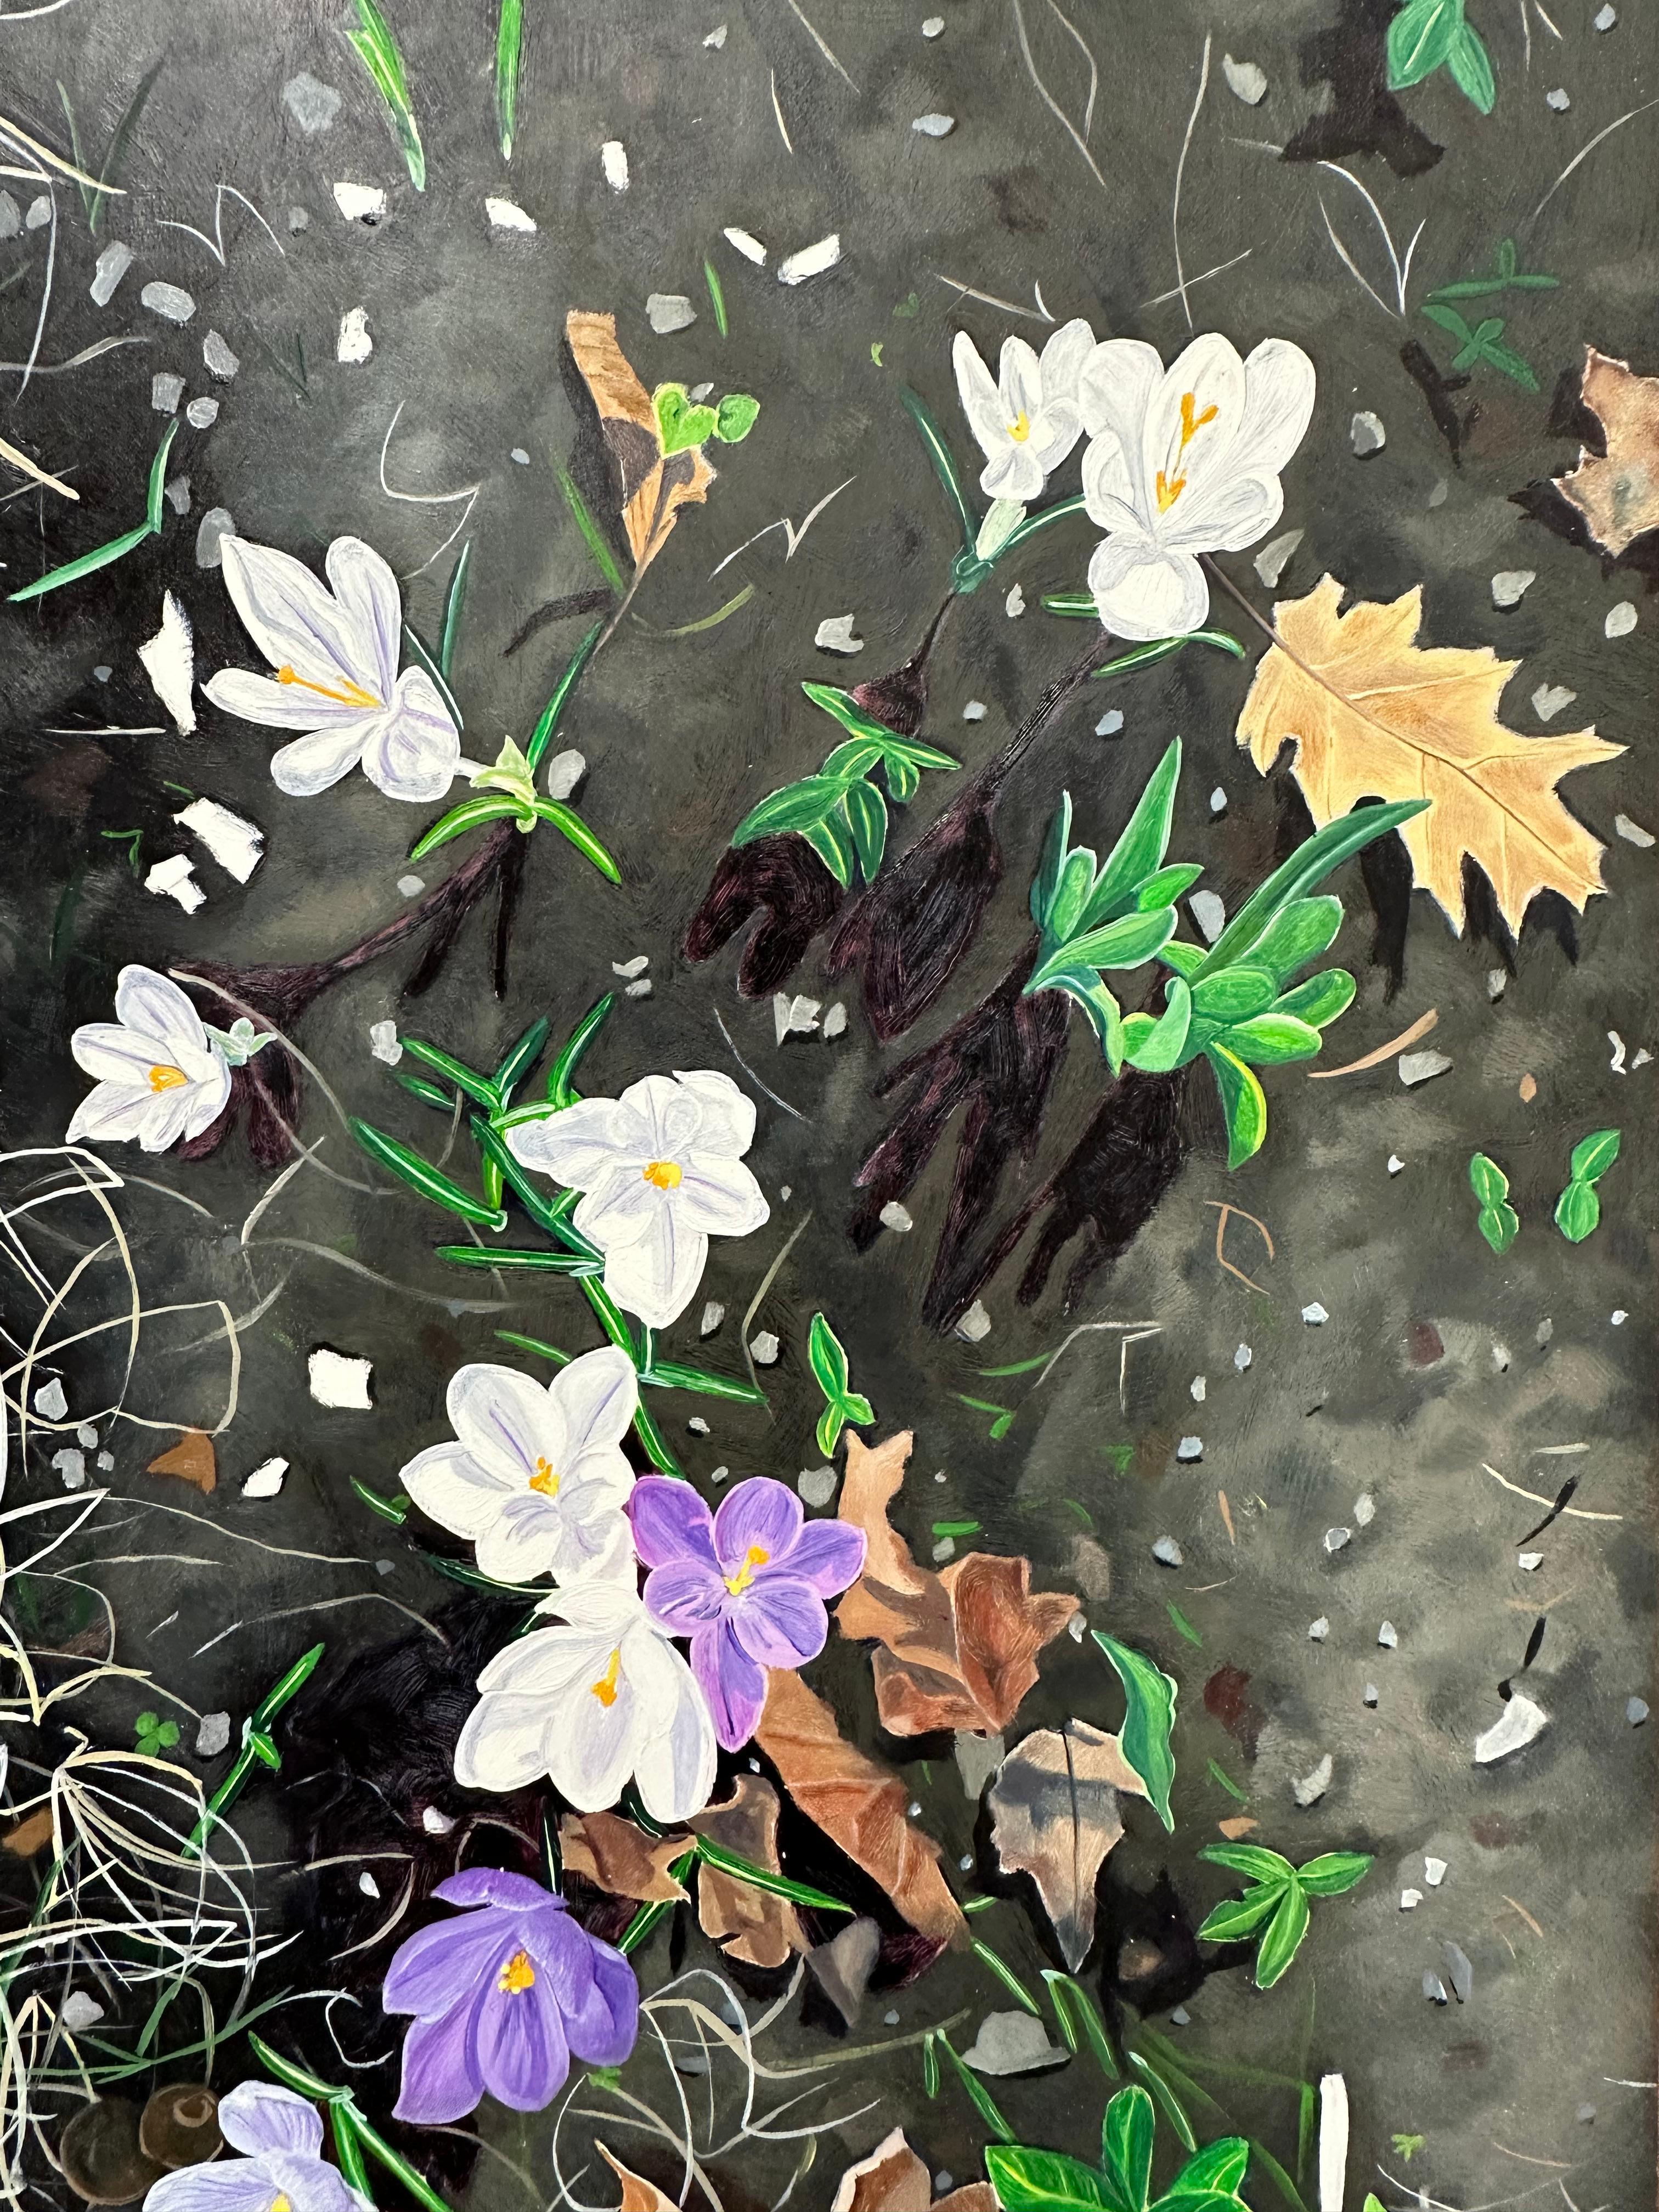 Purple and white crocuses are bright against the dark soil, while little tufts of grass begin to sprout from the ground. Signed, dated and titled on verso and framed in a natural wood float frame.
 
Amanda Acker’s nuanced oil paintings on panel give